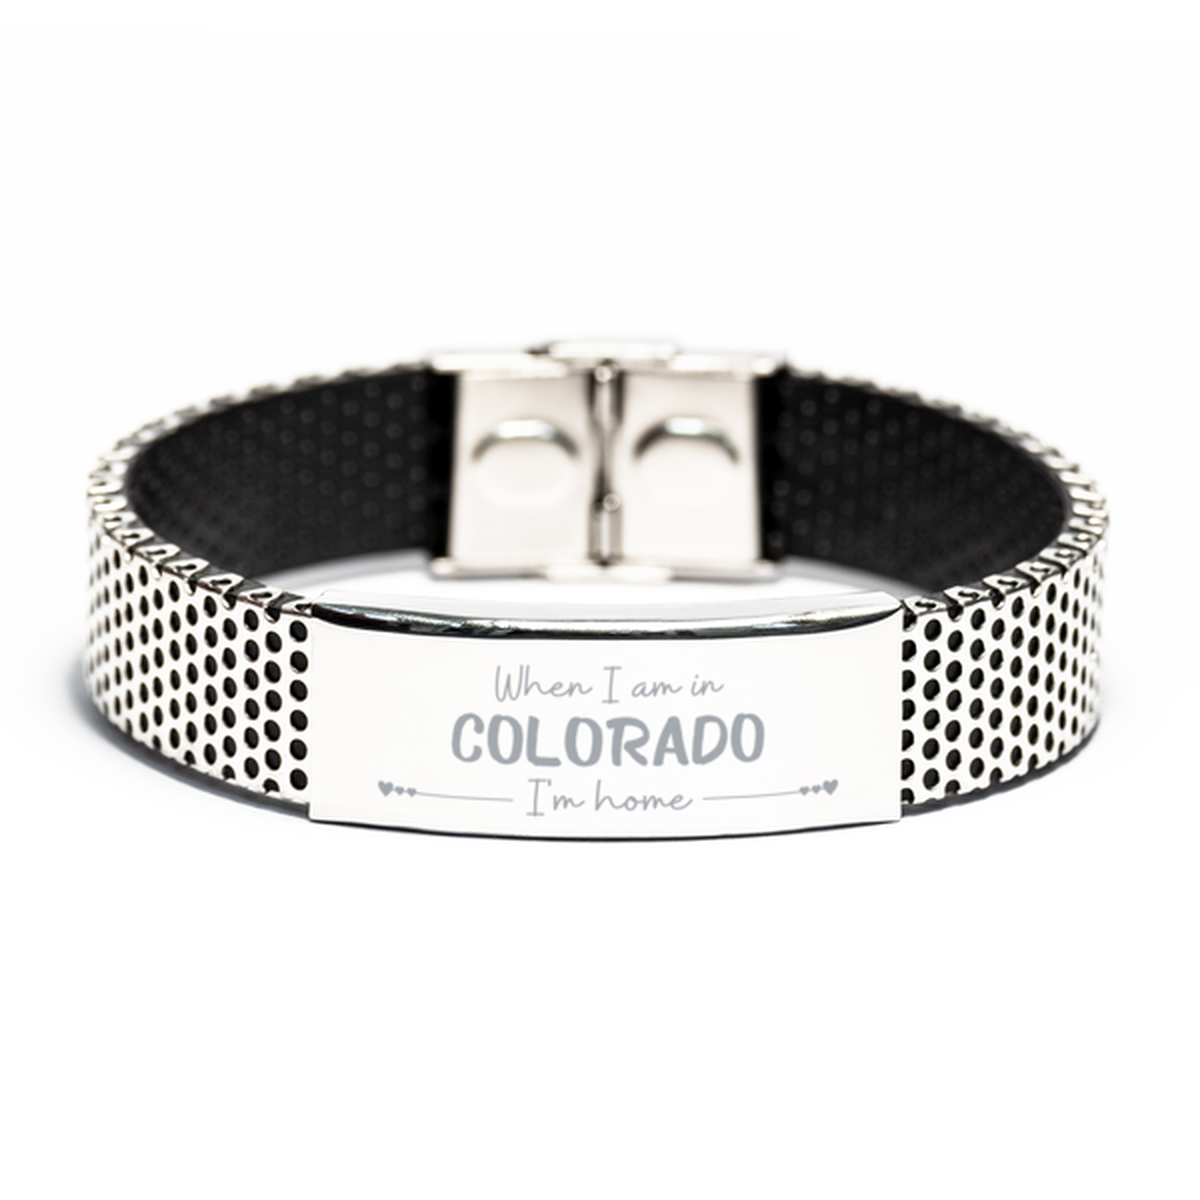 When I am in Colorado I'm home Stainless Steel Bracelet, Cheap Gifts For Colorado, State Colorado Birthday Gifts for Friends Coworker